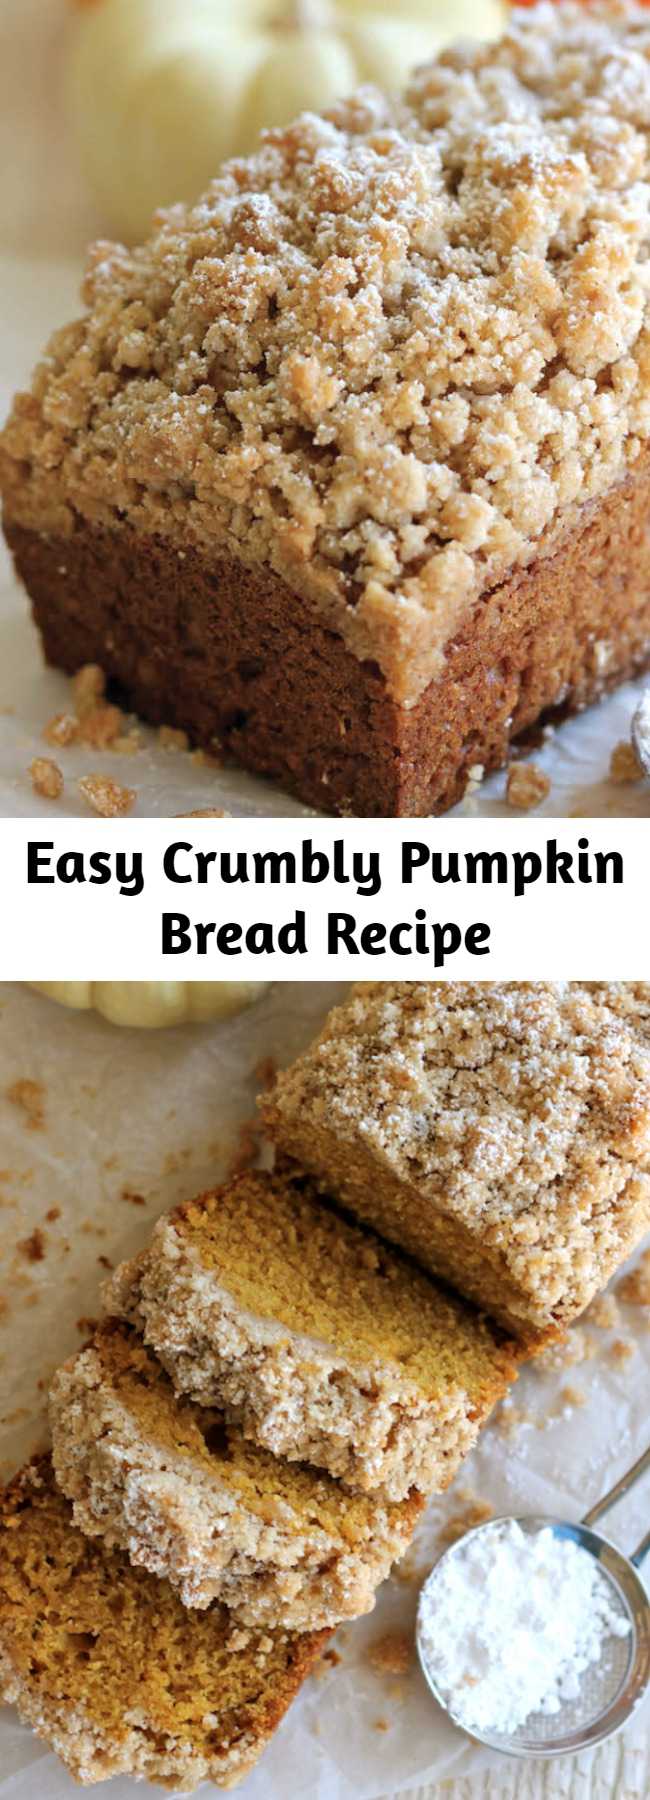 Easy Crumbly Pumpkin Bread Recipe - With lightened-up options, this can be eaten guilt-free! And the crumb topping is out of this world amazing!